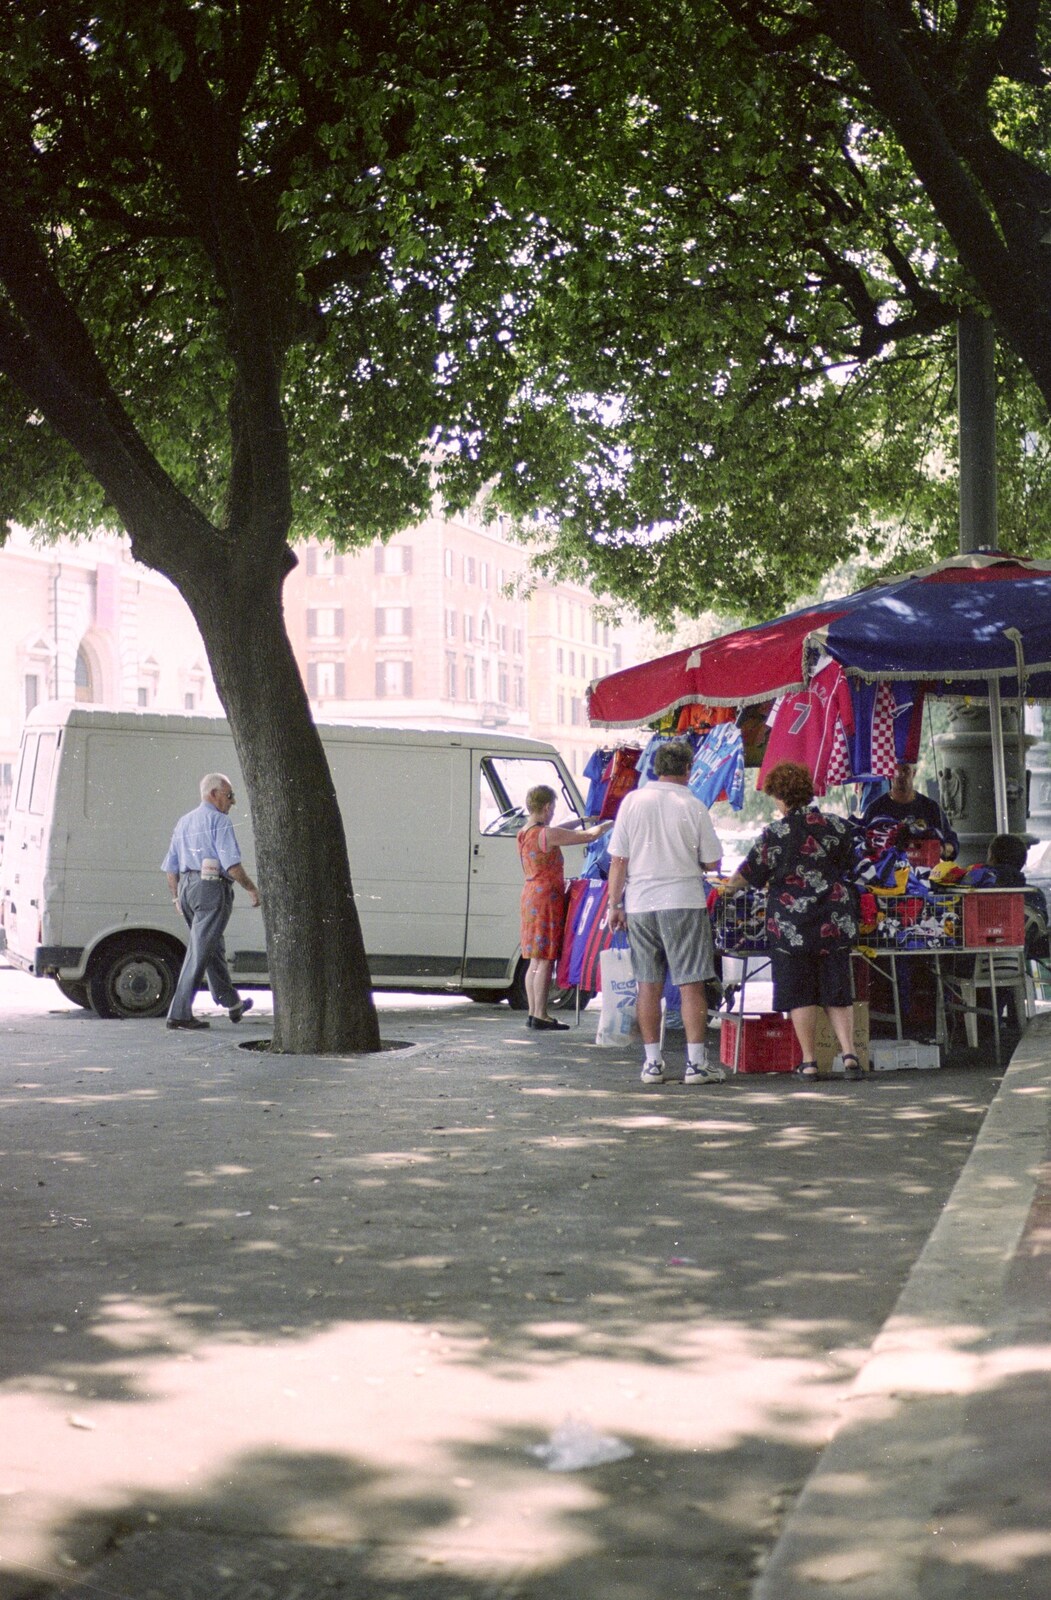 A street-market stall in a shady spot from A Working Trip to Rome, Italy - 10th September 1999